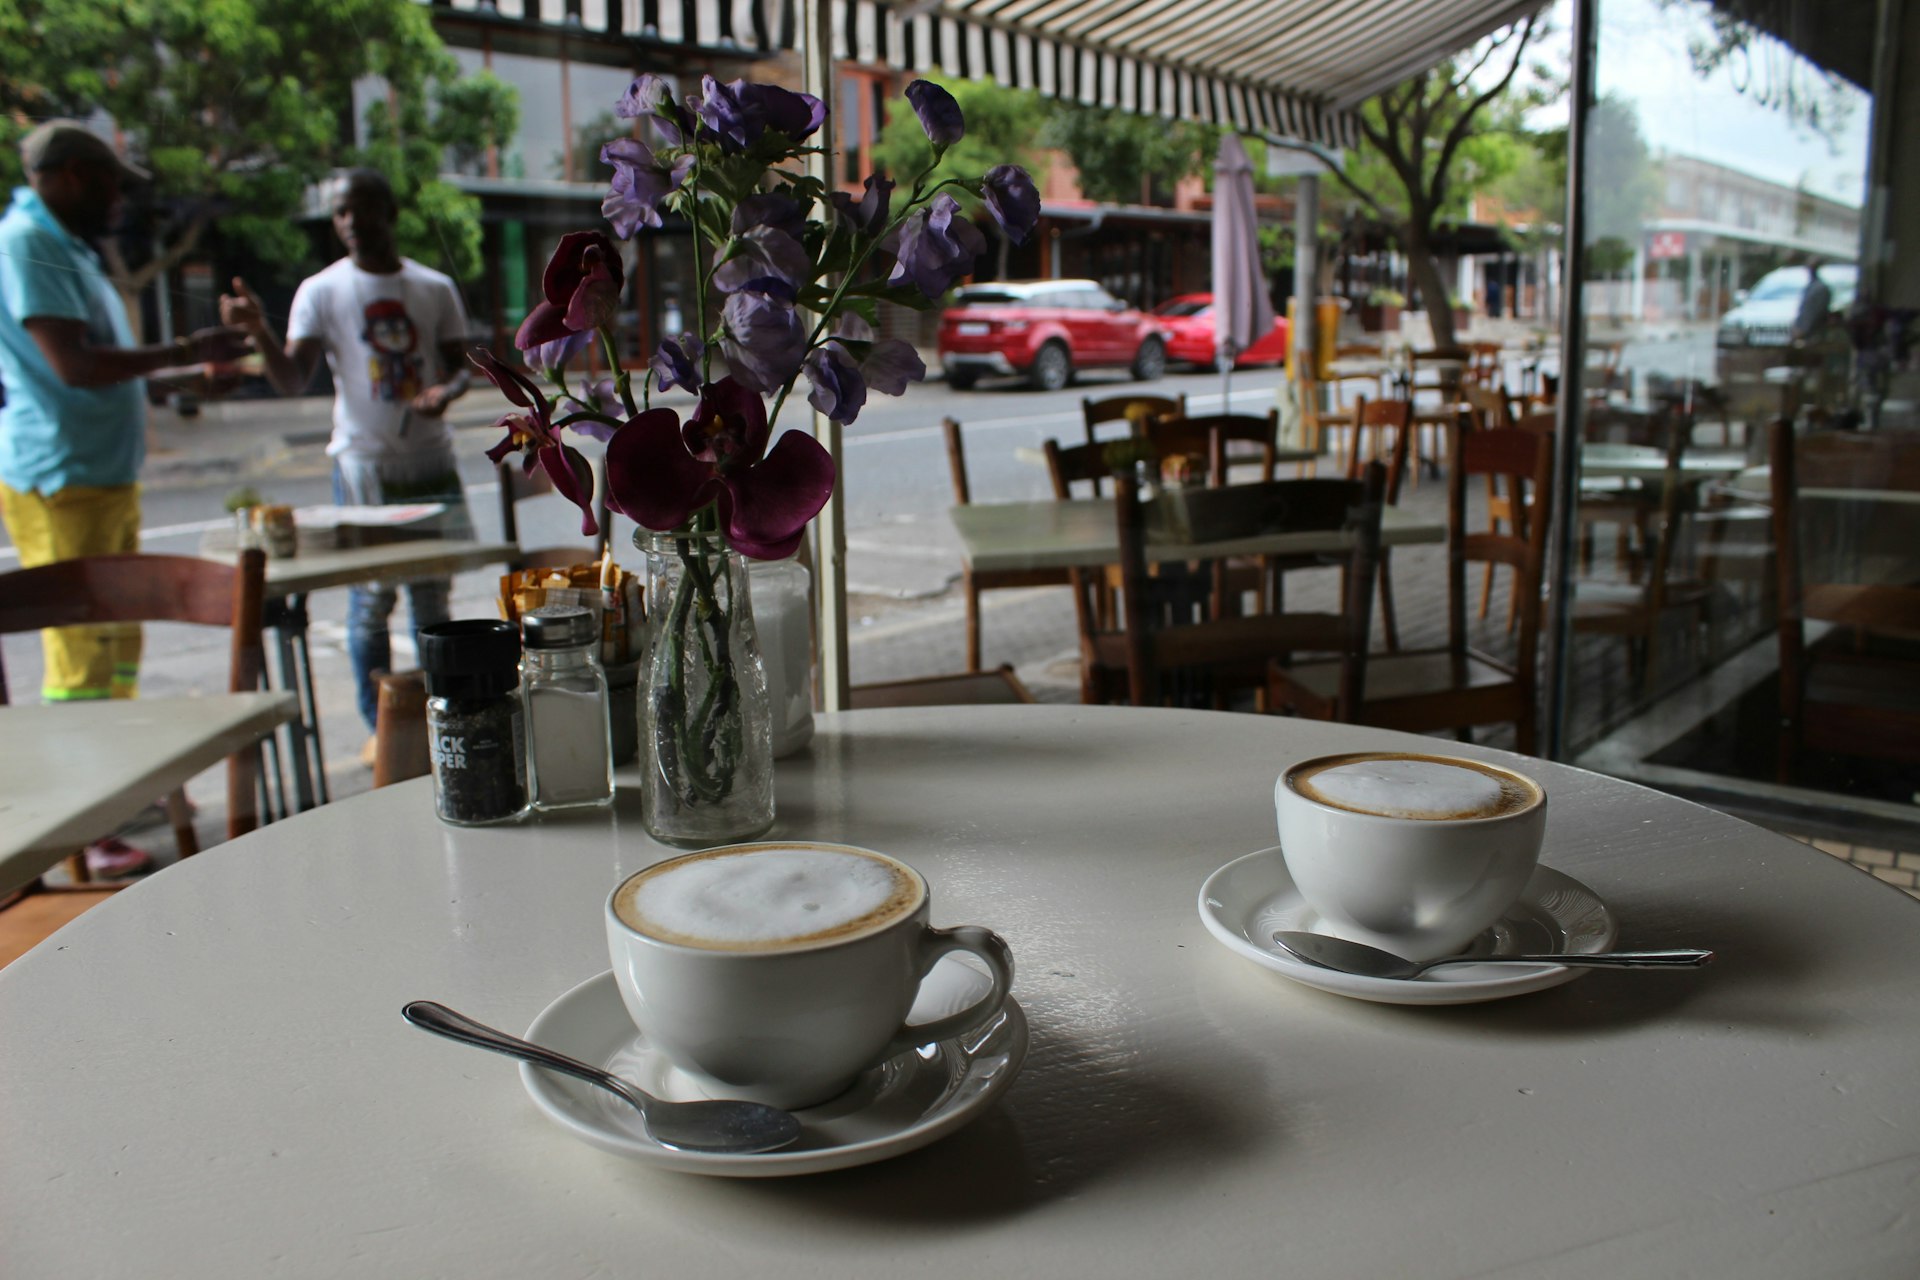 Sip a cappuccino or two over a relaxed brunch at the humbly named Nice. © Jenali Skuse / Lonely Planet